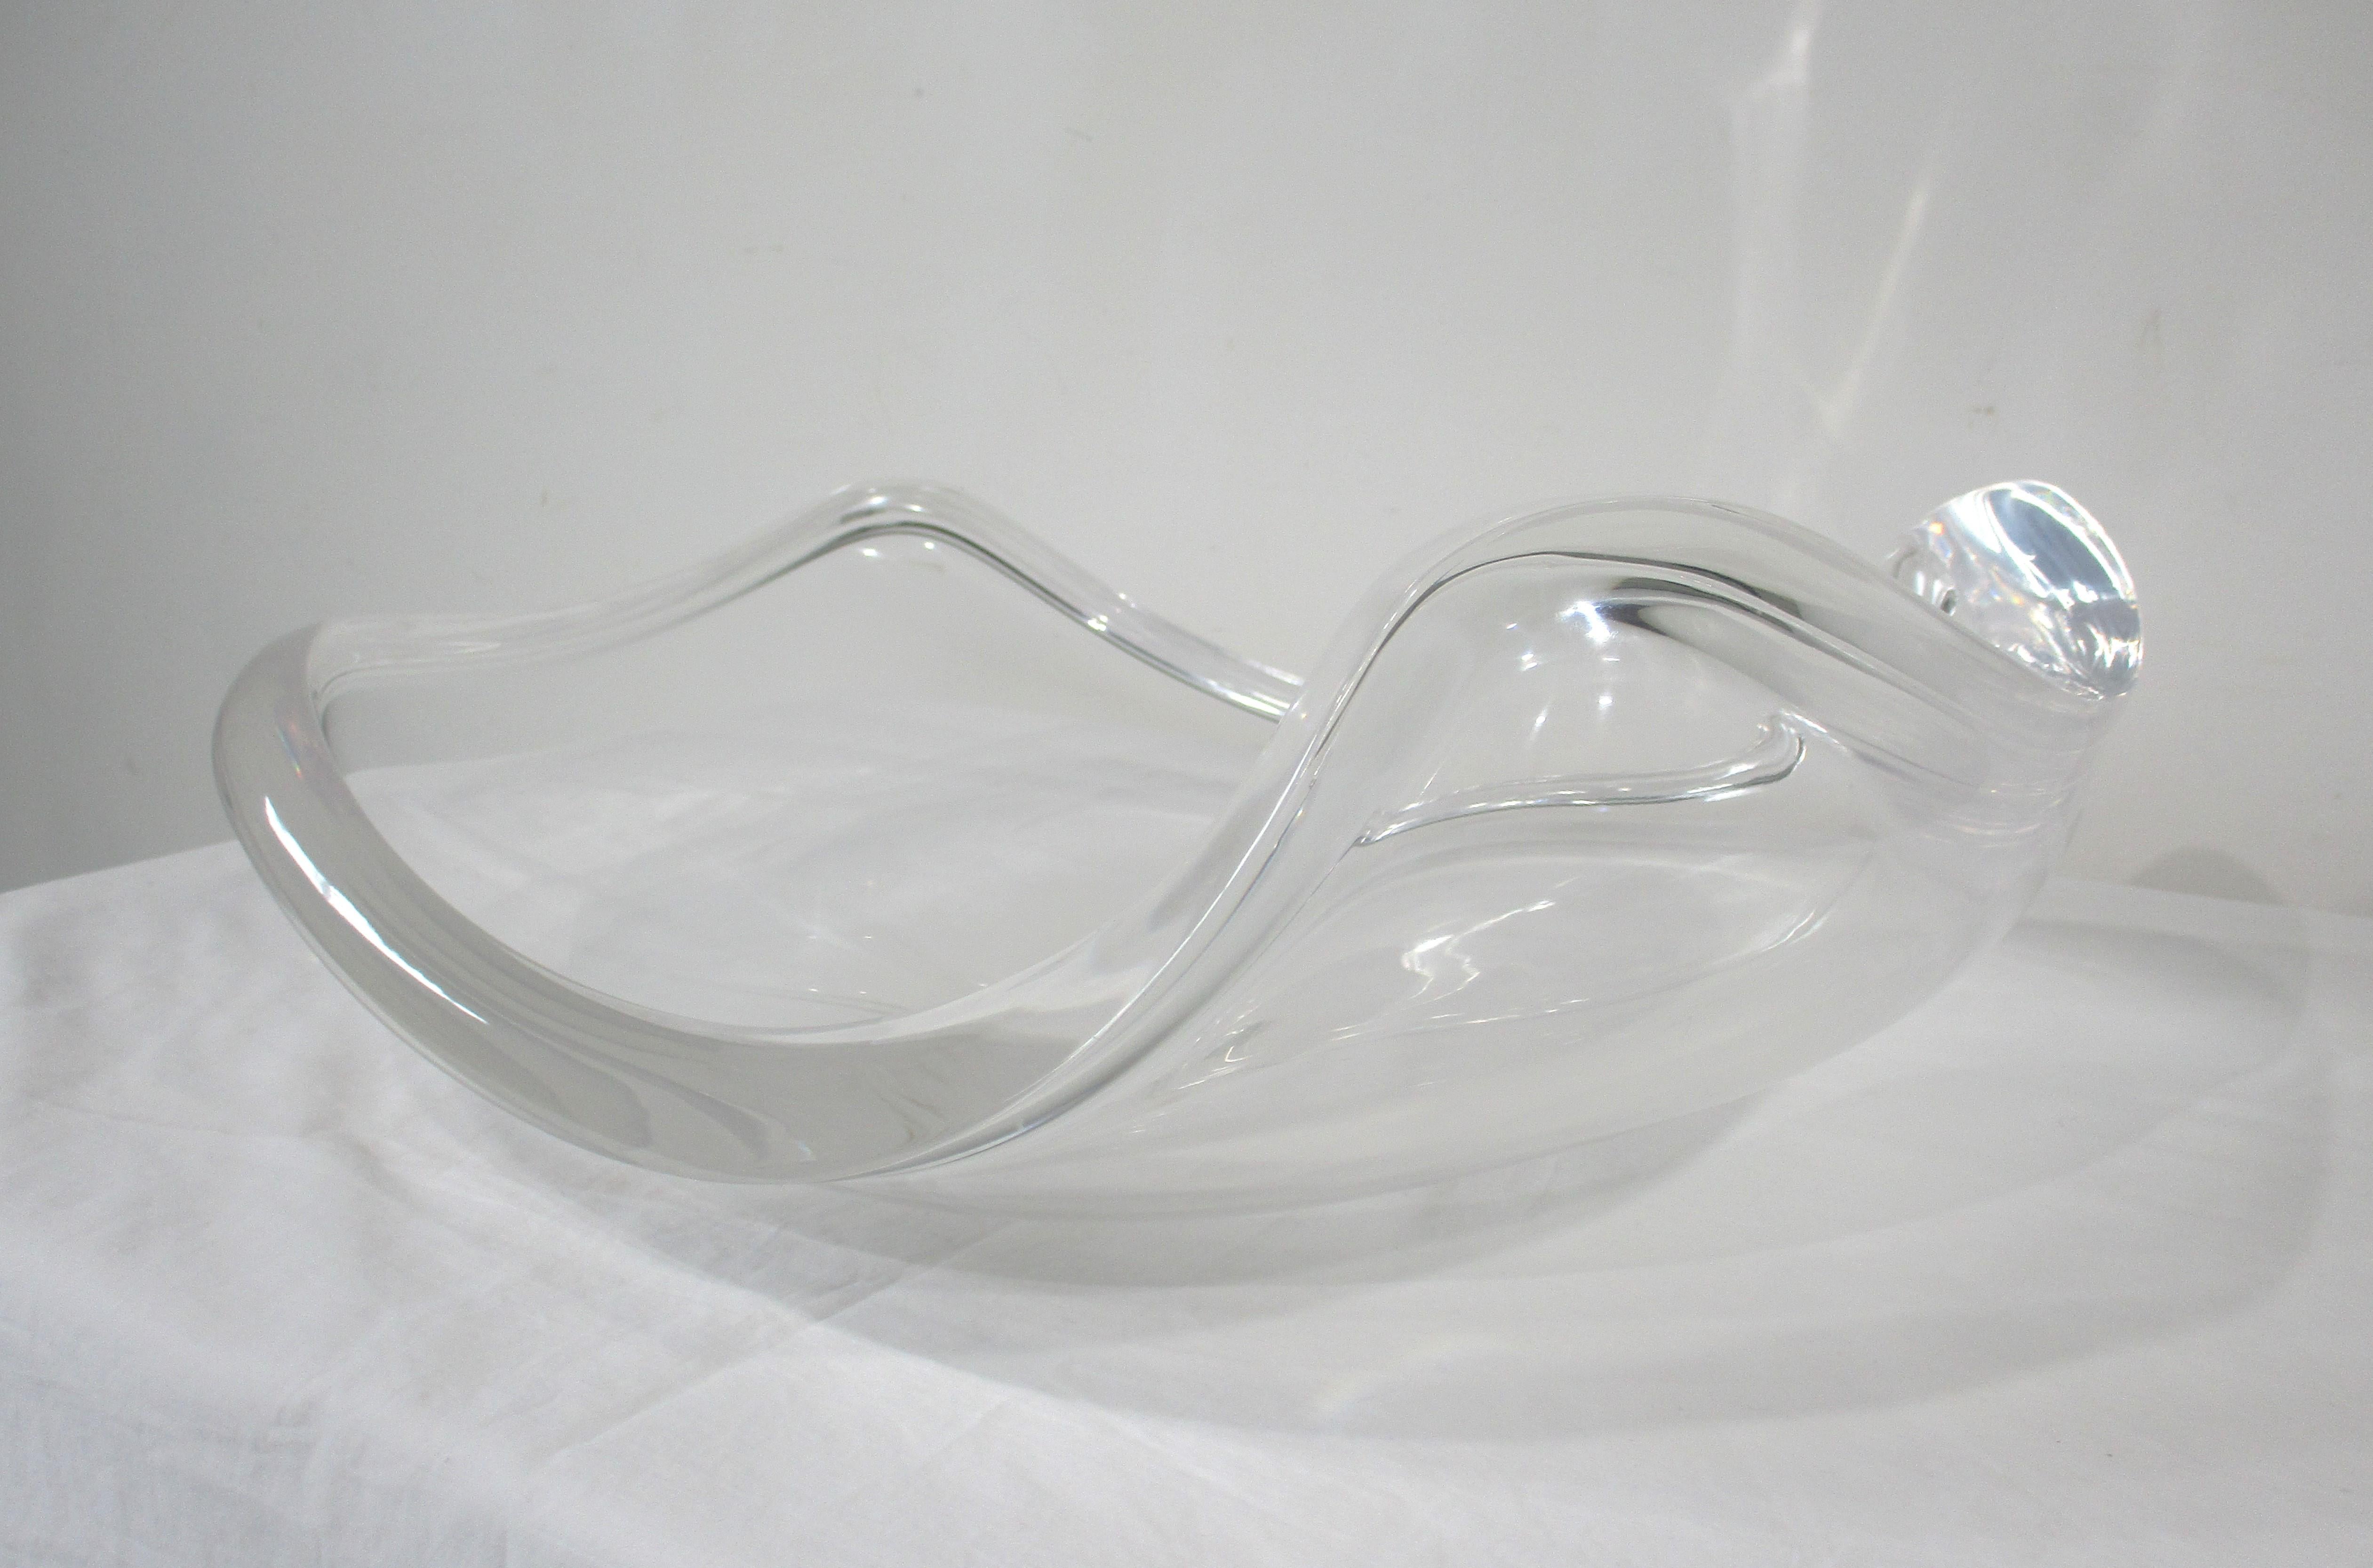 Herb Ritts Large Mid Century Sculptural Lucite Center Piece Bowl for Astrolite For Sale 3